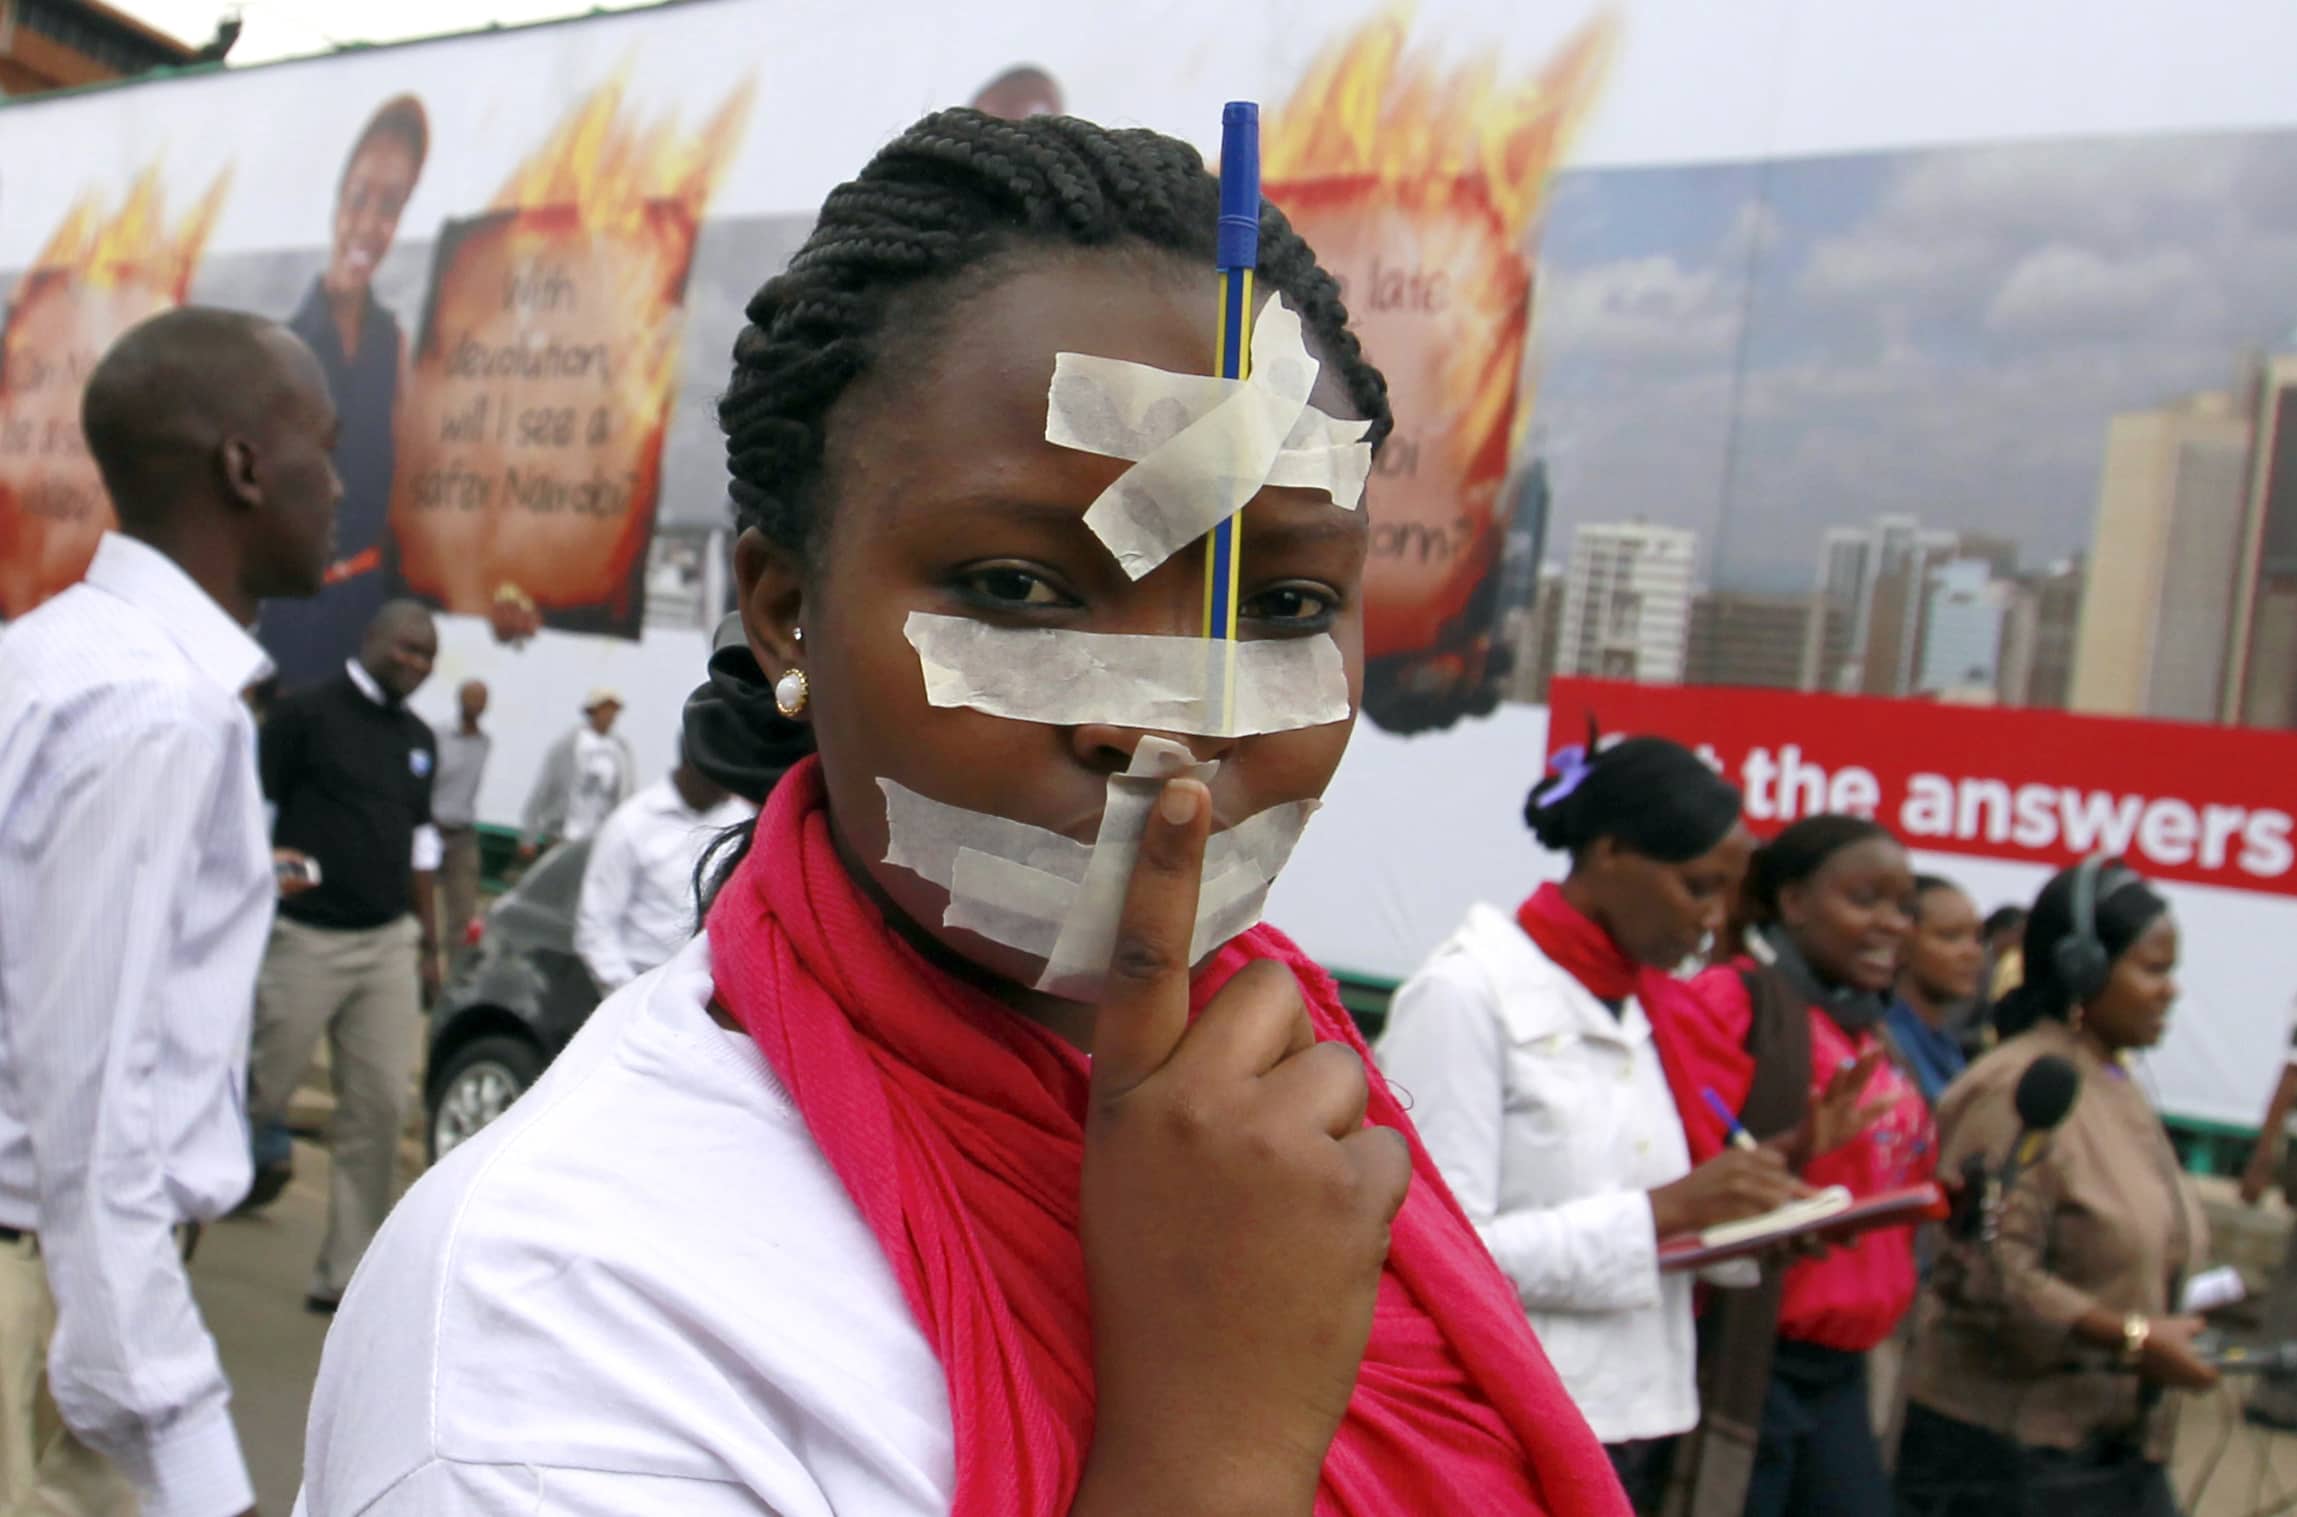 A Kenyan journalist participates in a protest with tape over her mouth and a pen on her forehead along the streets of the capital Nairobi, 3 December 2013., REUTERS/Thomas Mukoya